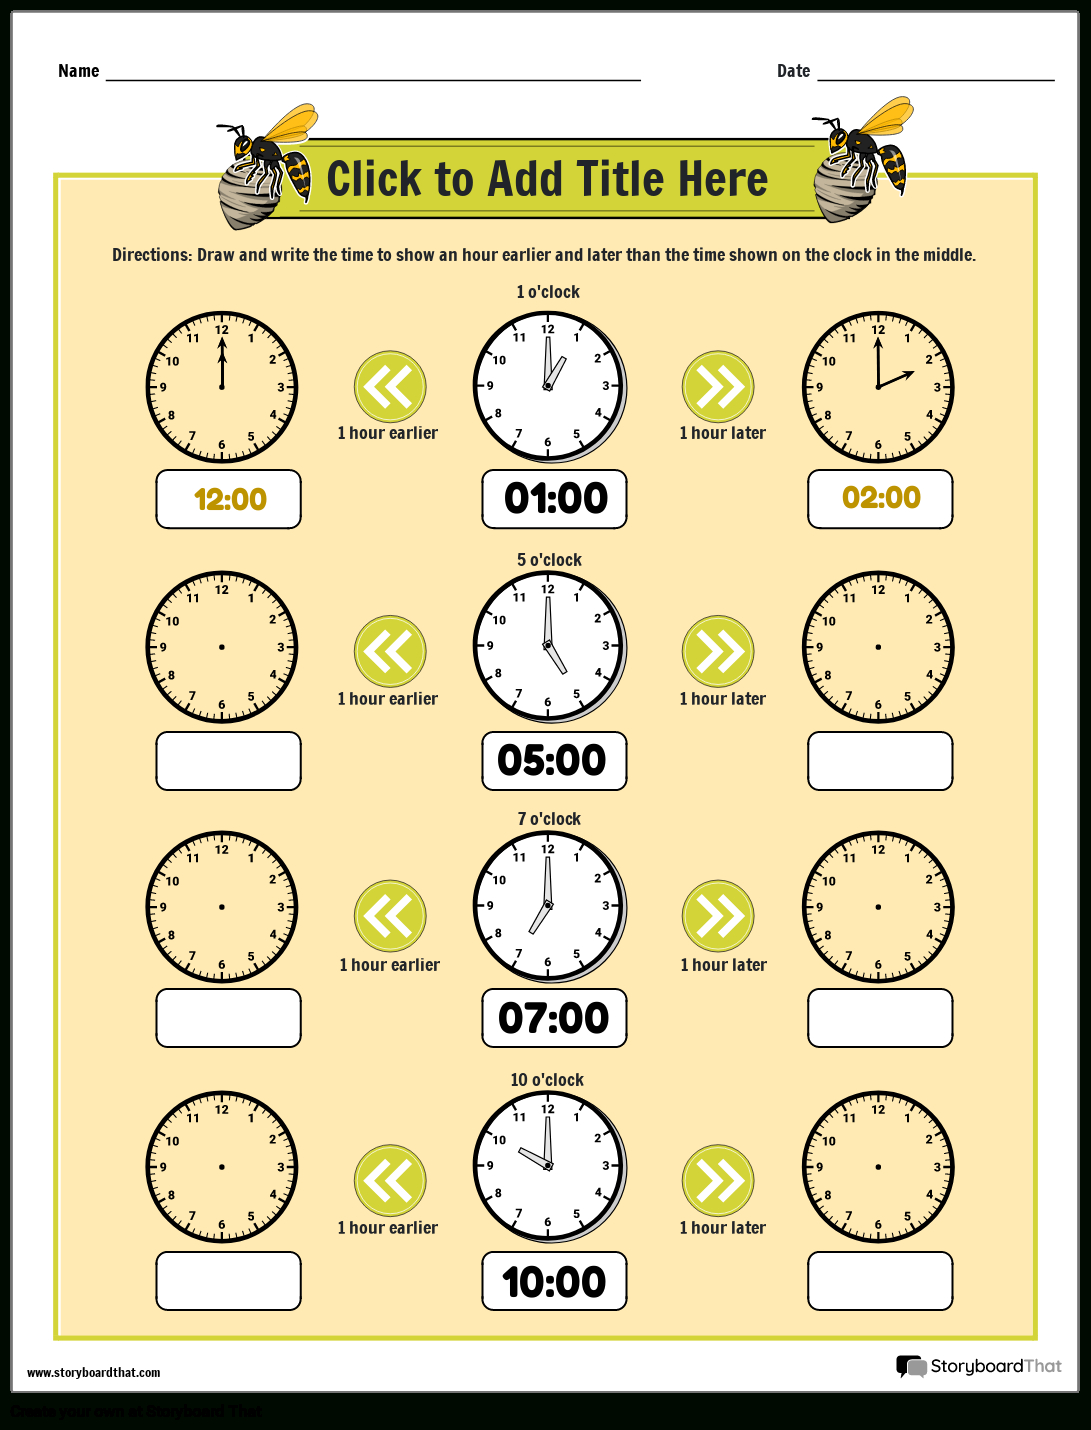 Elapsed Time Worksheets For Free At Storyboardthat within Elapsed Time Worksheets Free Printable